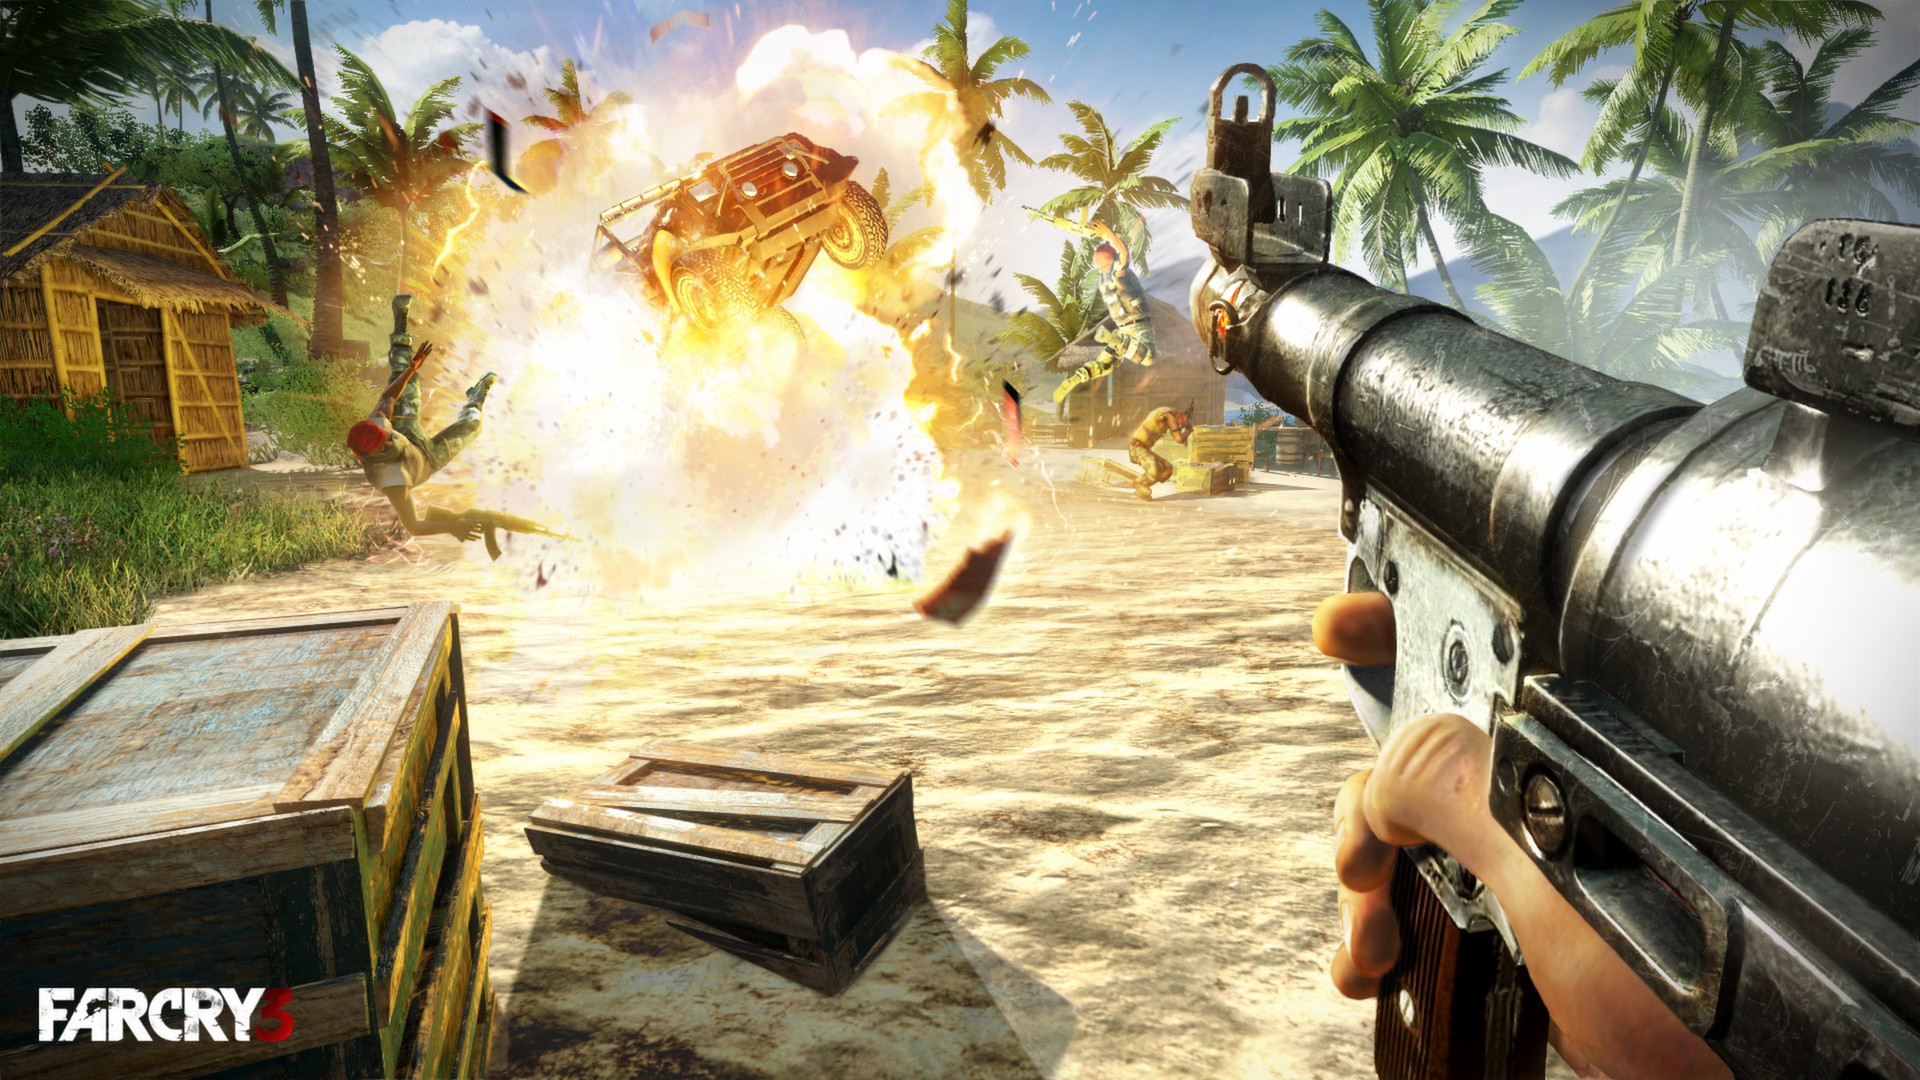 Far cry 2 free download full version pc